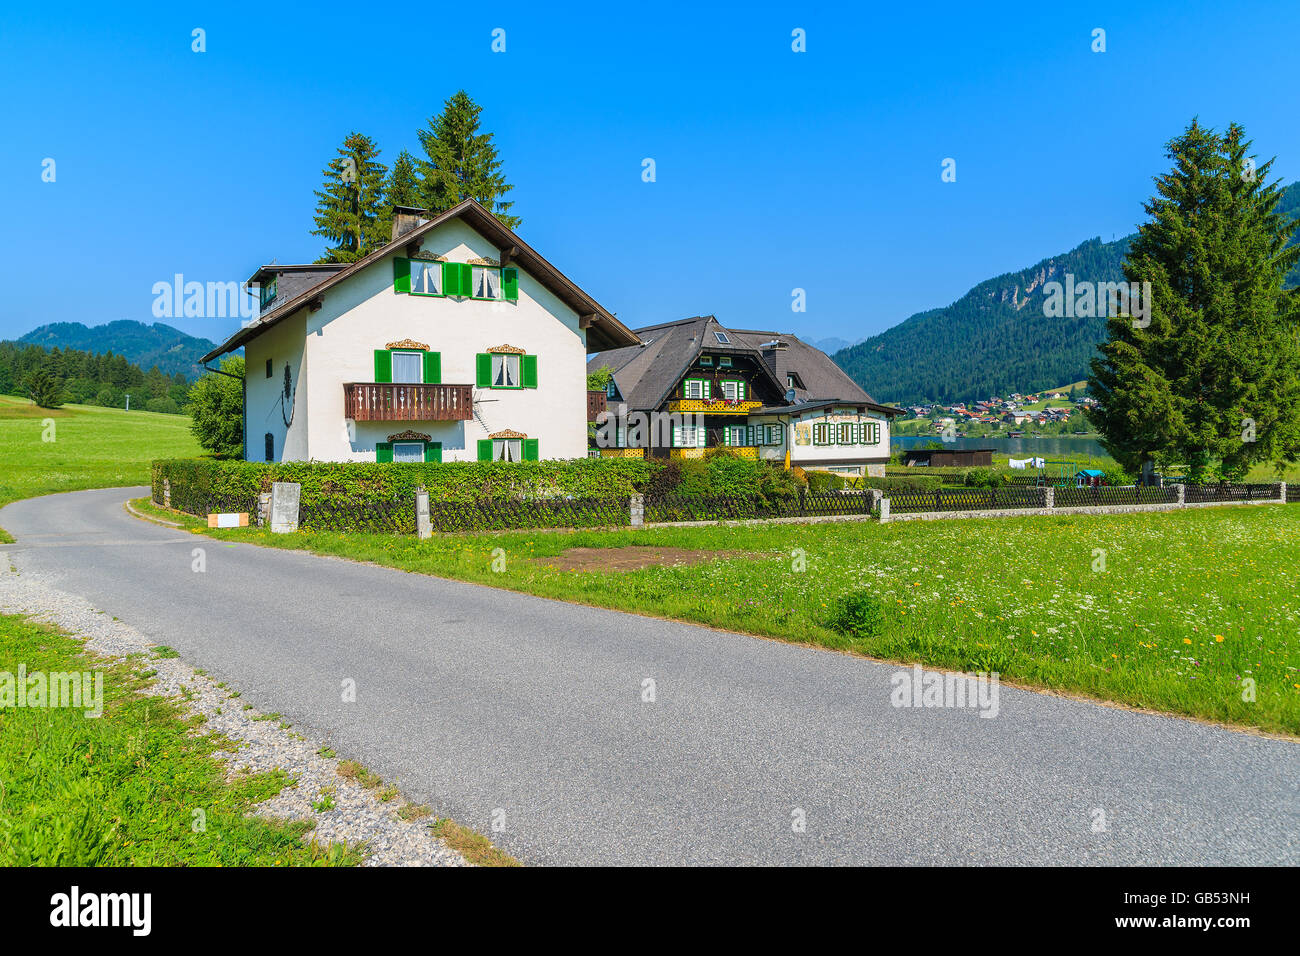 Typical houses along road in countryside landscape of Alps Mountains in summer landscape of Weissensee lake, Austria Stock Photo